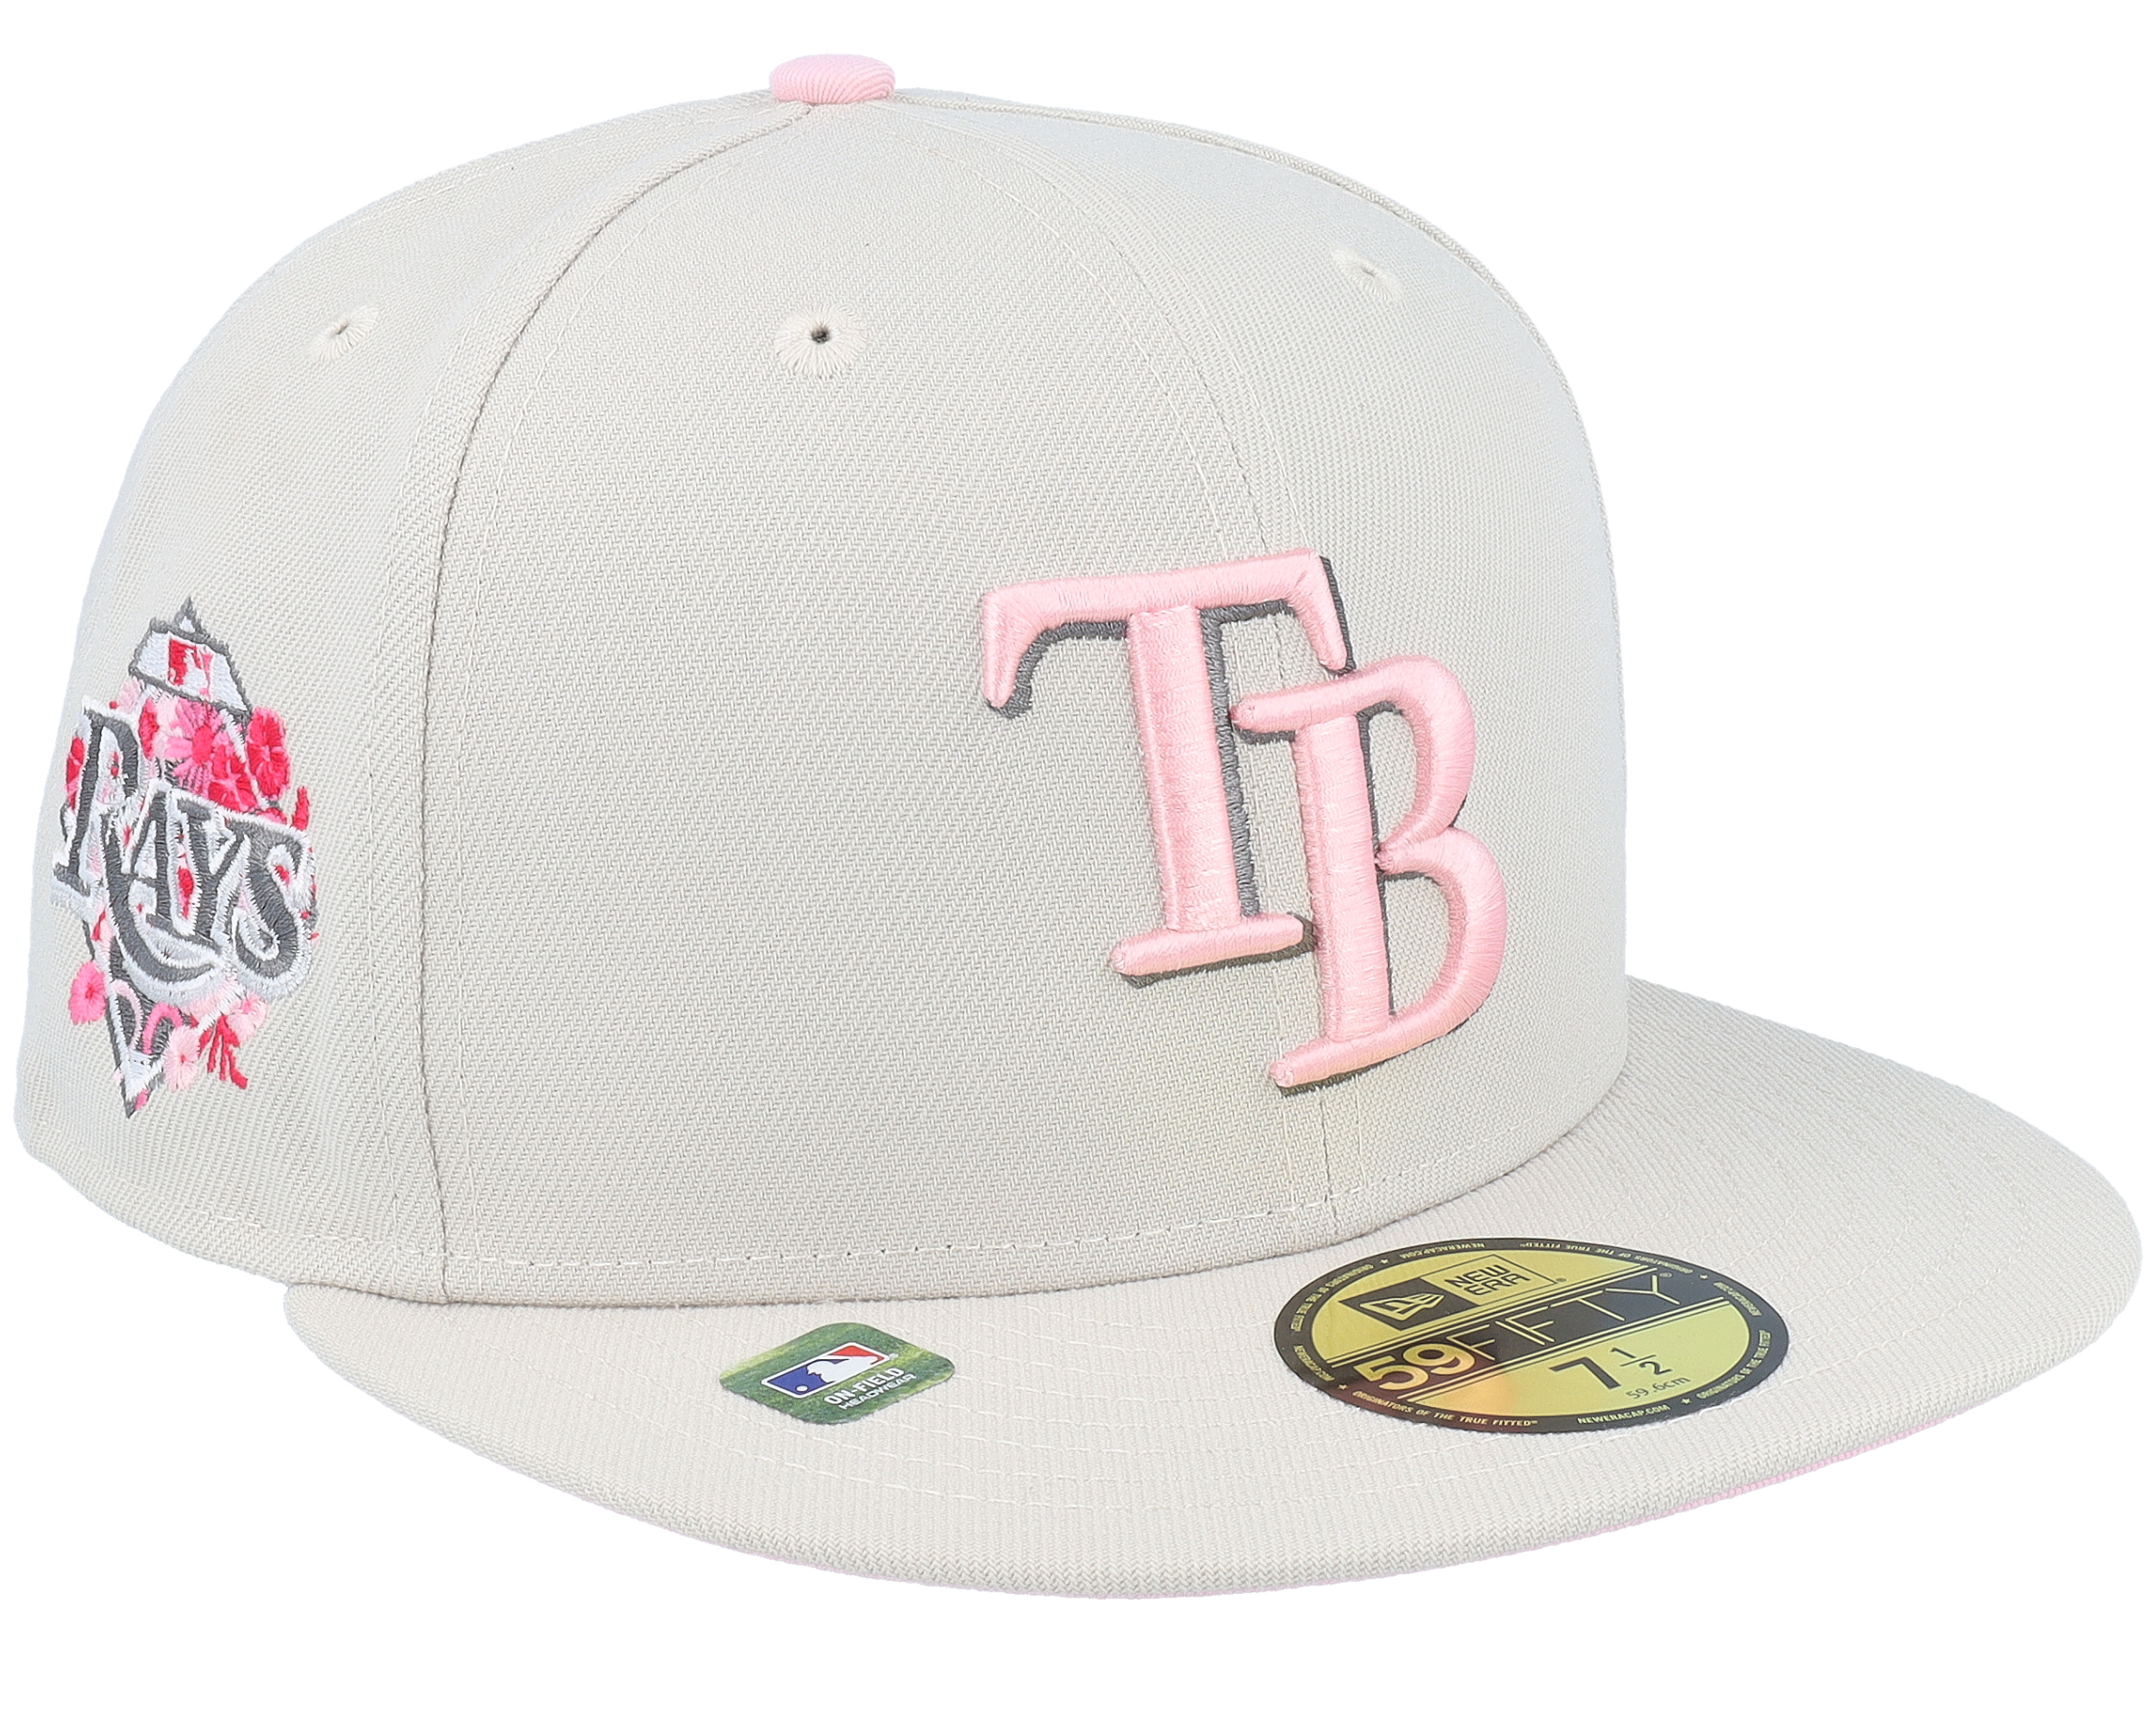 Tampa Bay Rays 59FIFTY Mothers Day 23 Beige/Pink Fitted - New Era cap